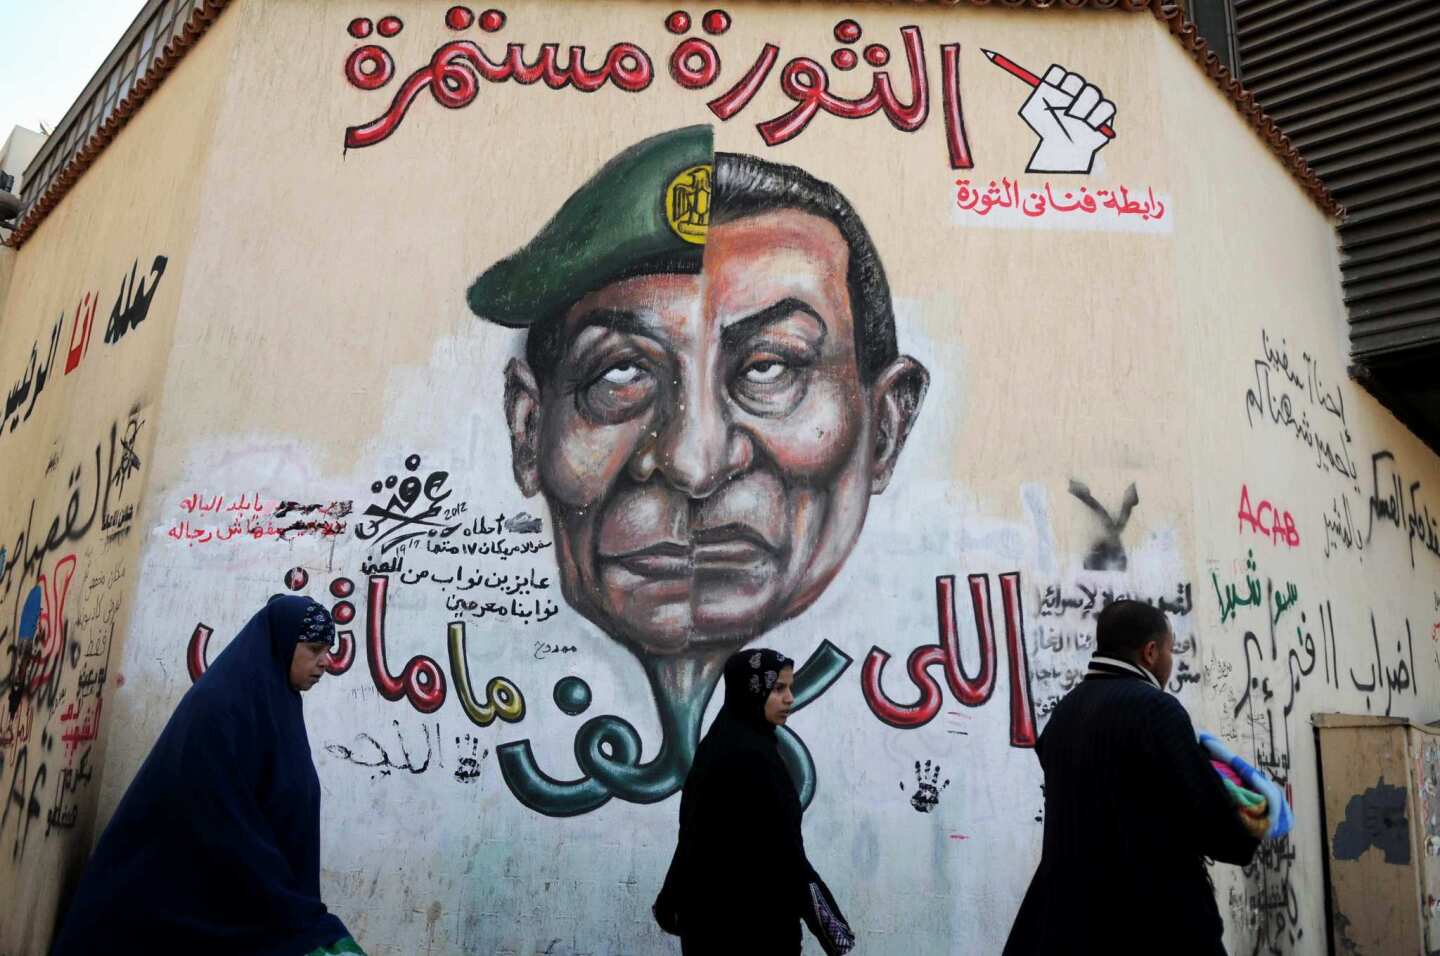 Egyptians in Cairo's Tahrir Square walk past graffiti of a head composed of the faces of ousted President Hosni Mubarak, right, and Field Marshal Mohamed Hussein Tantawi, leader of Egypt's ruling military council, with a slogan reading, "The revolution continues."